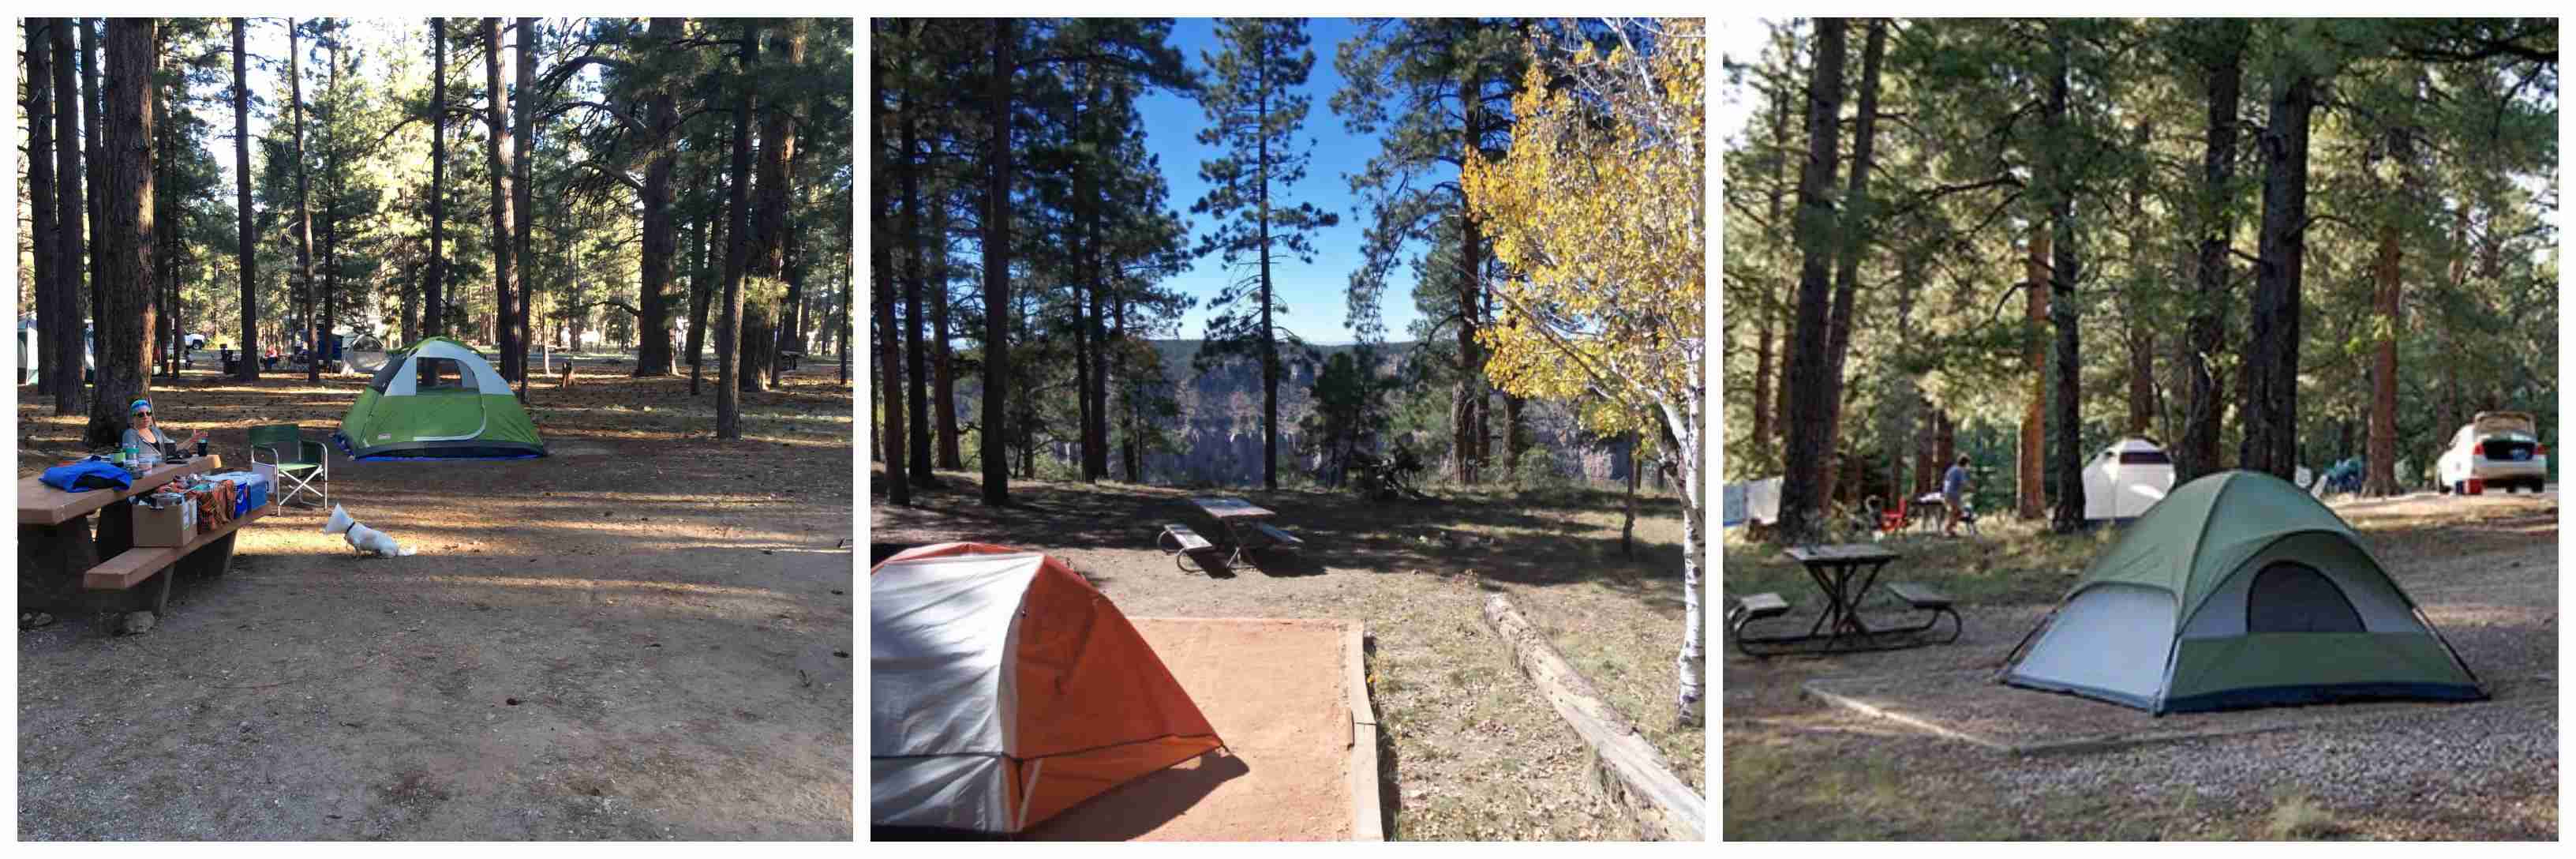 two separate camping sites at the Bright Angel Campground